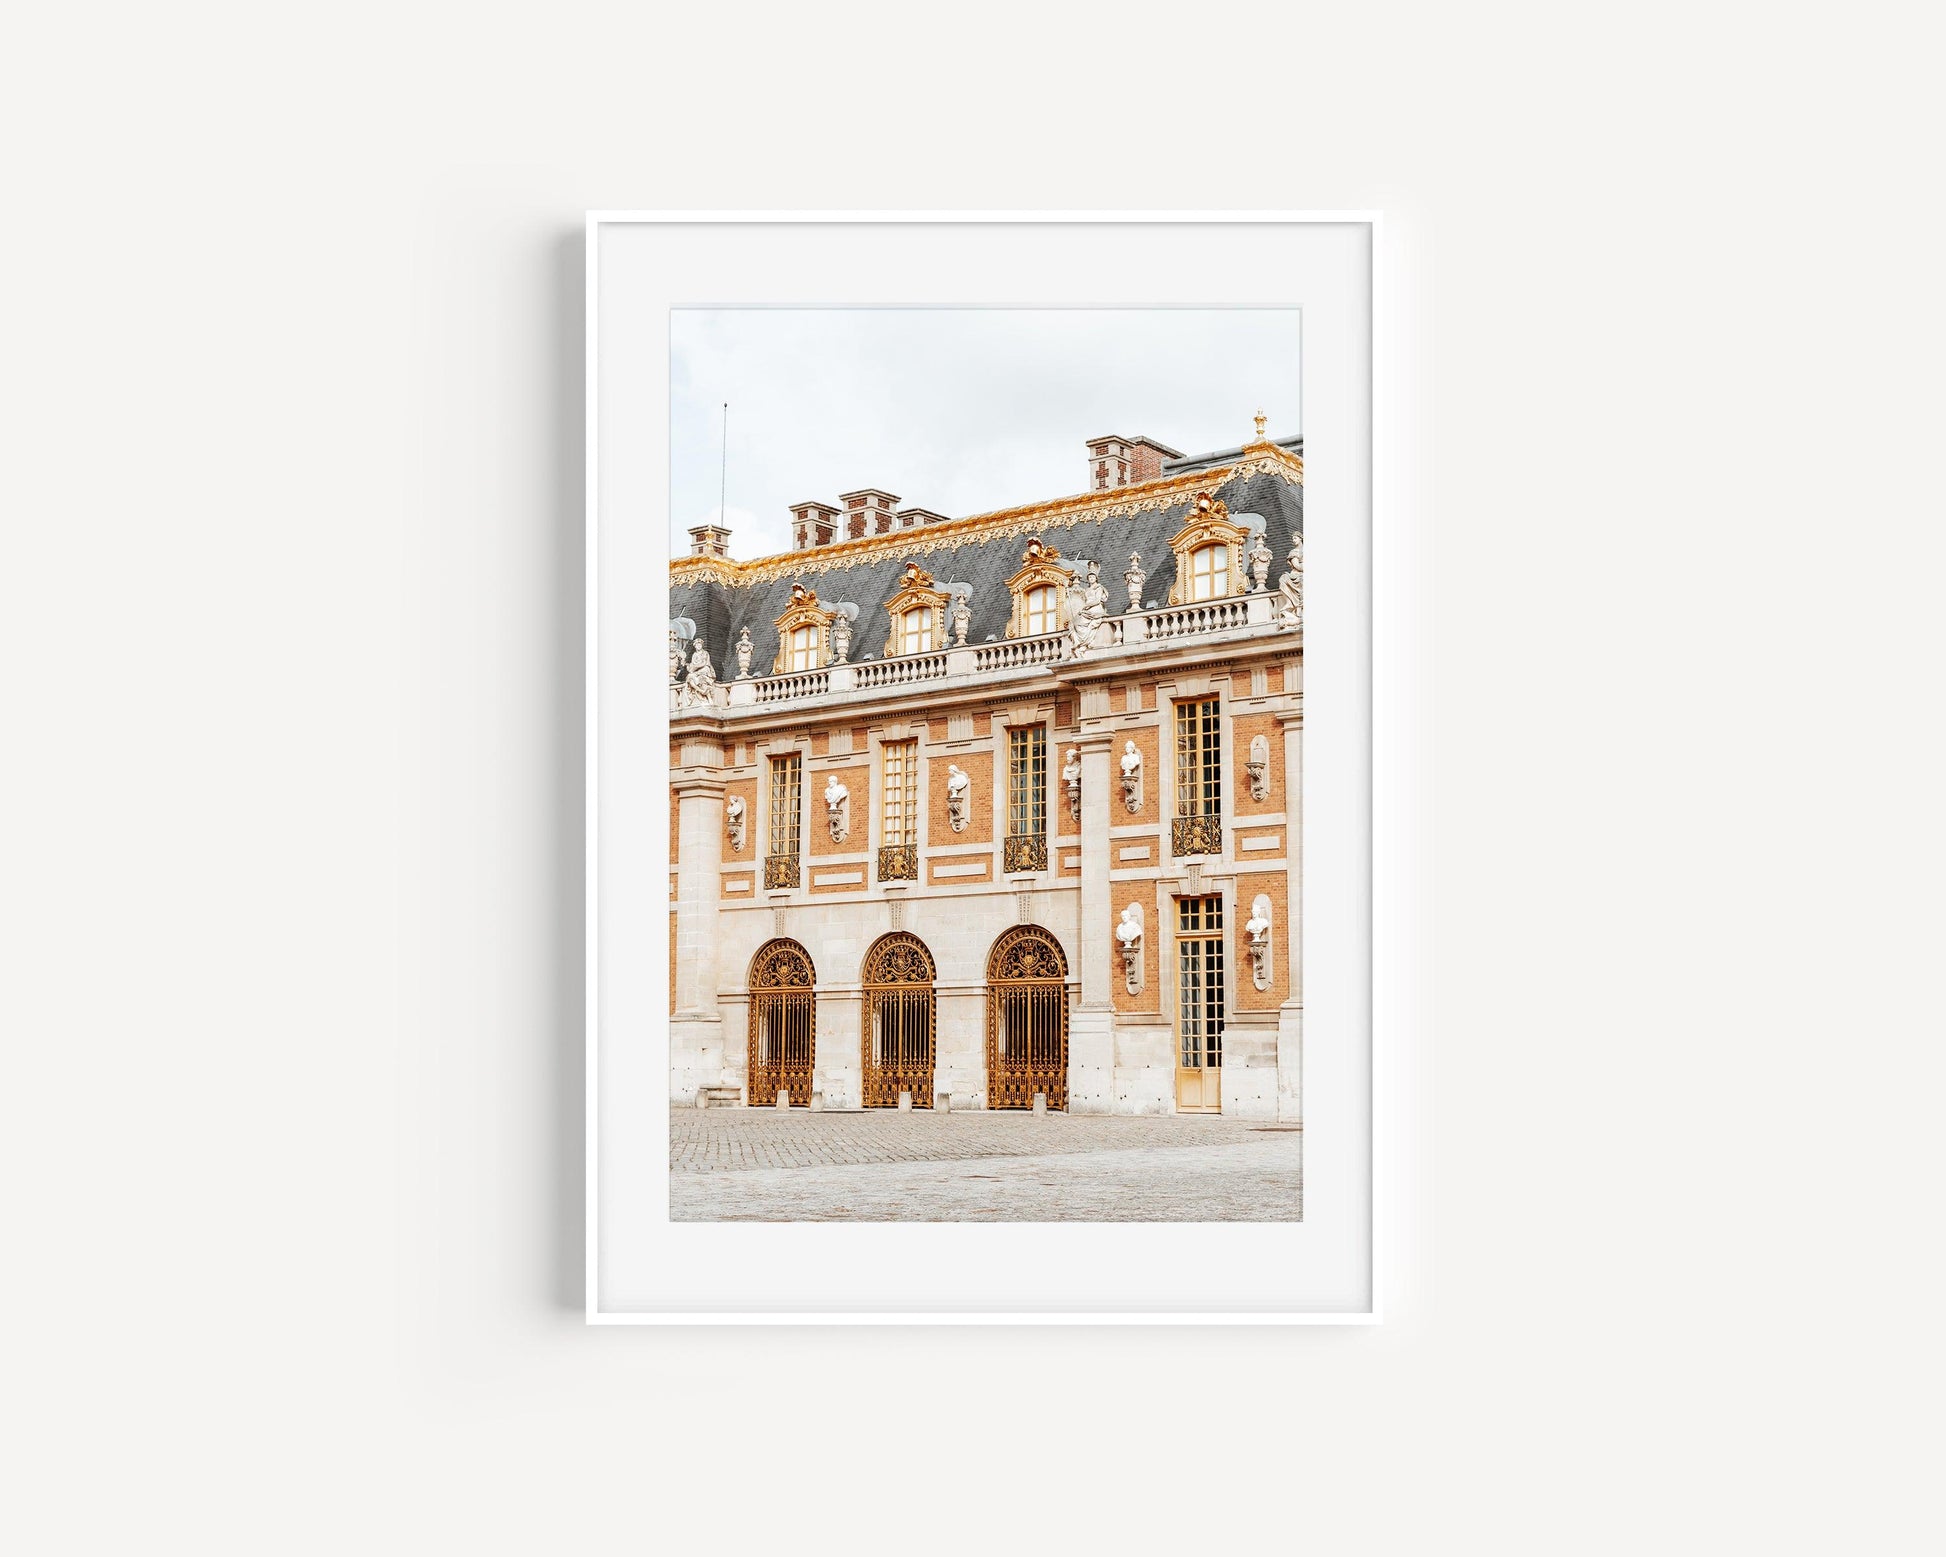 Palace of Versailles Architecture Photography Print | Paris Photography Print Print - Departures Print Shop